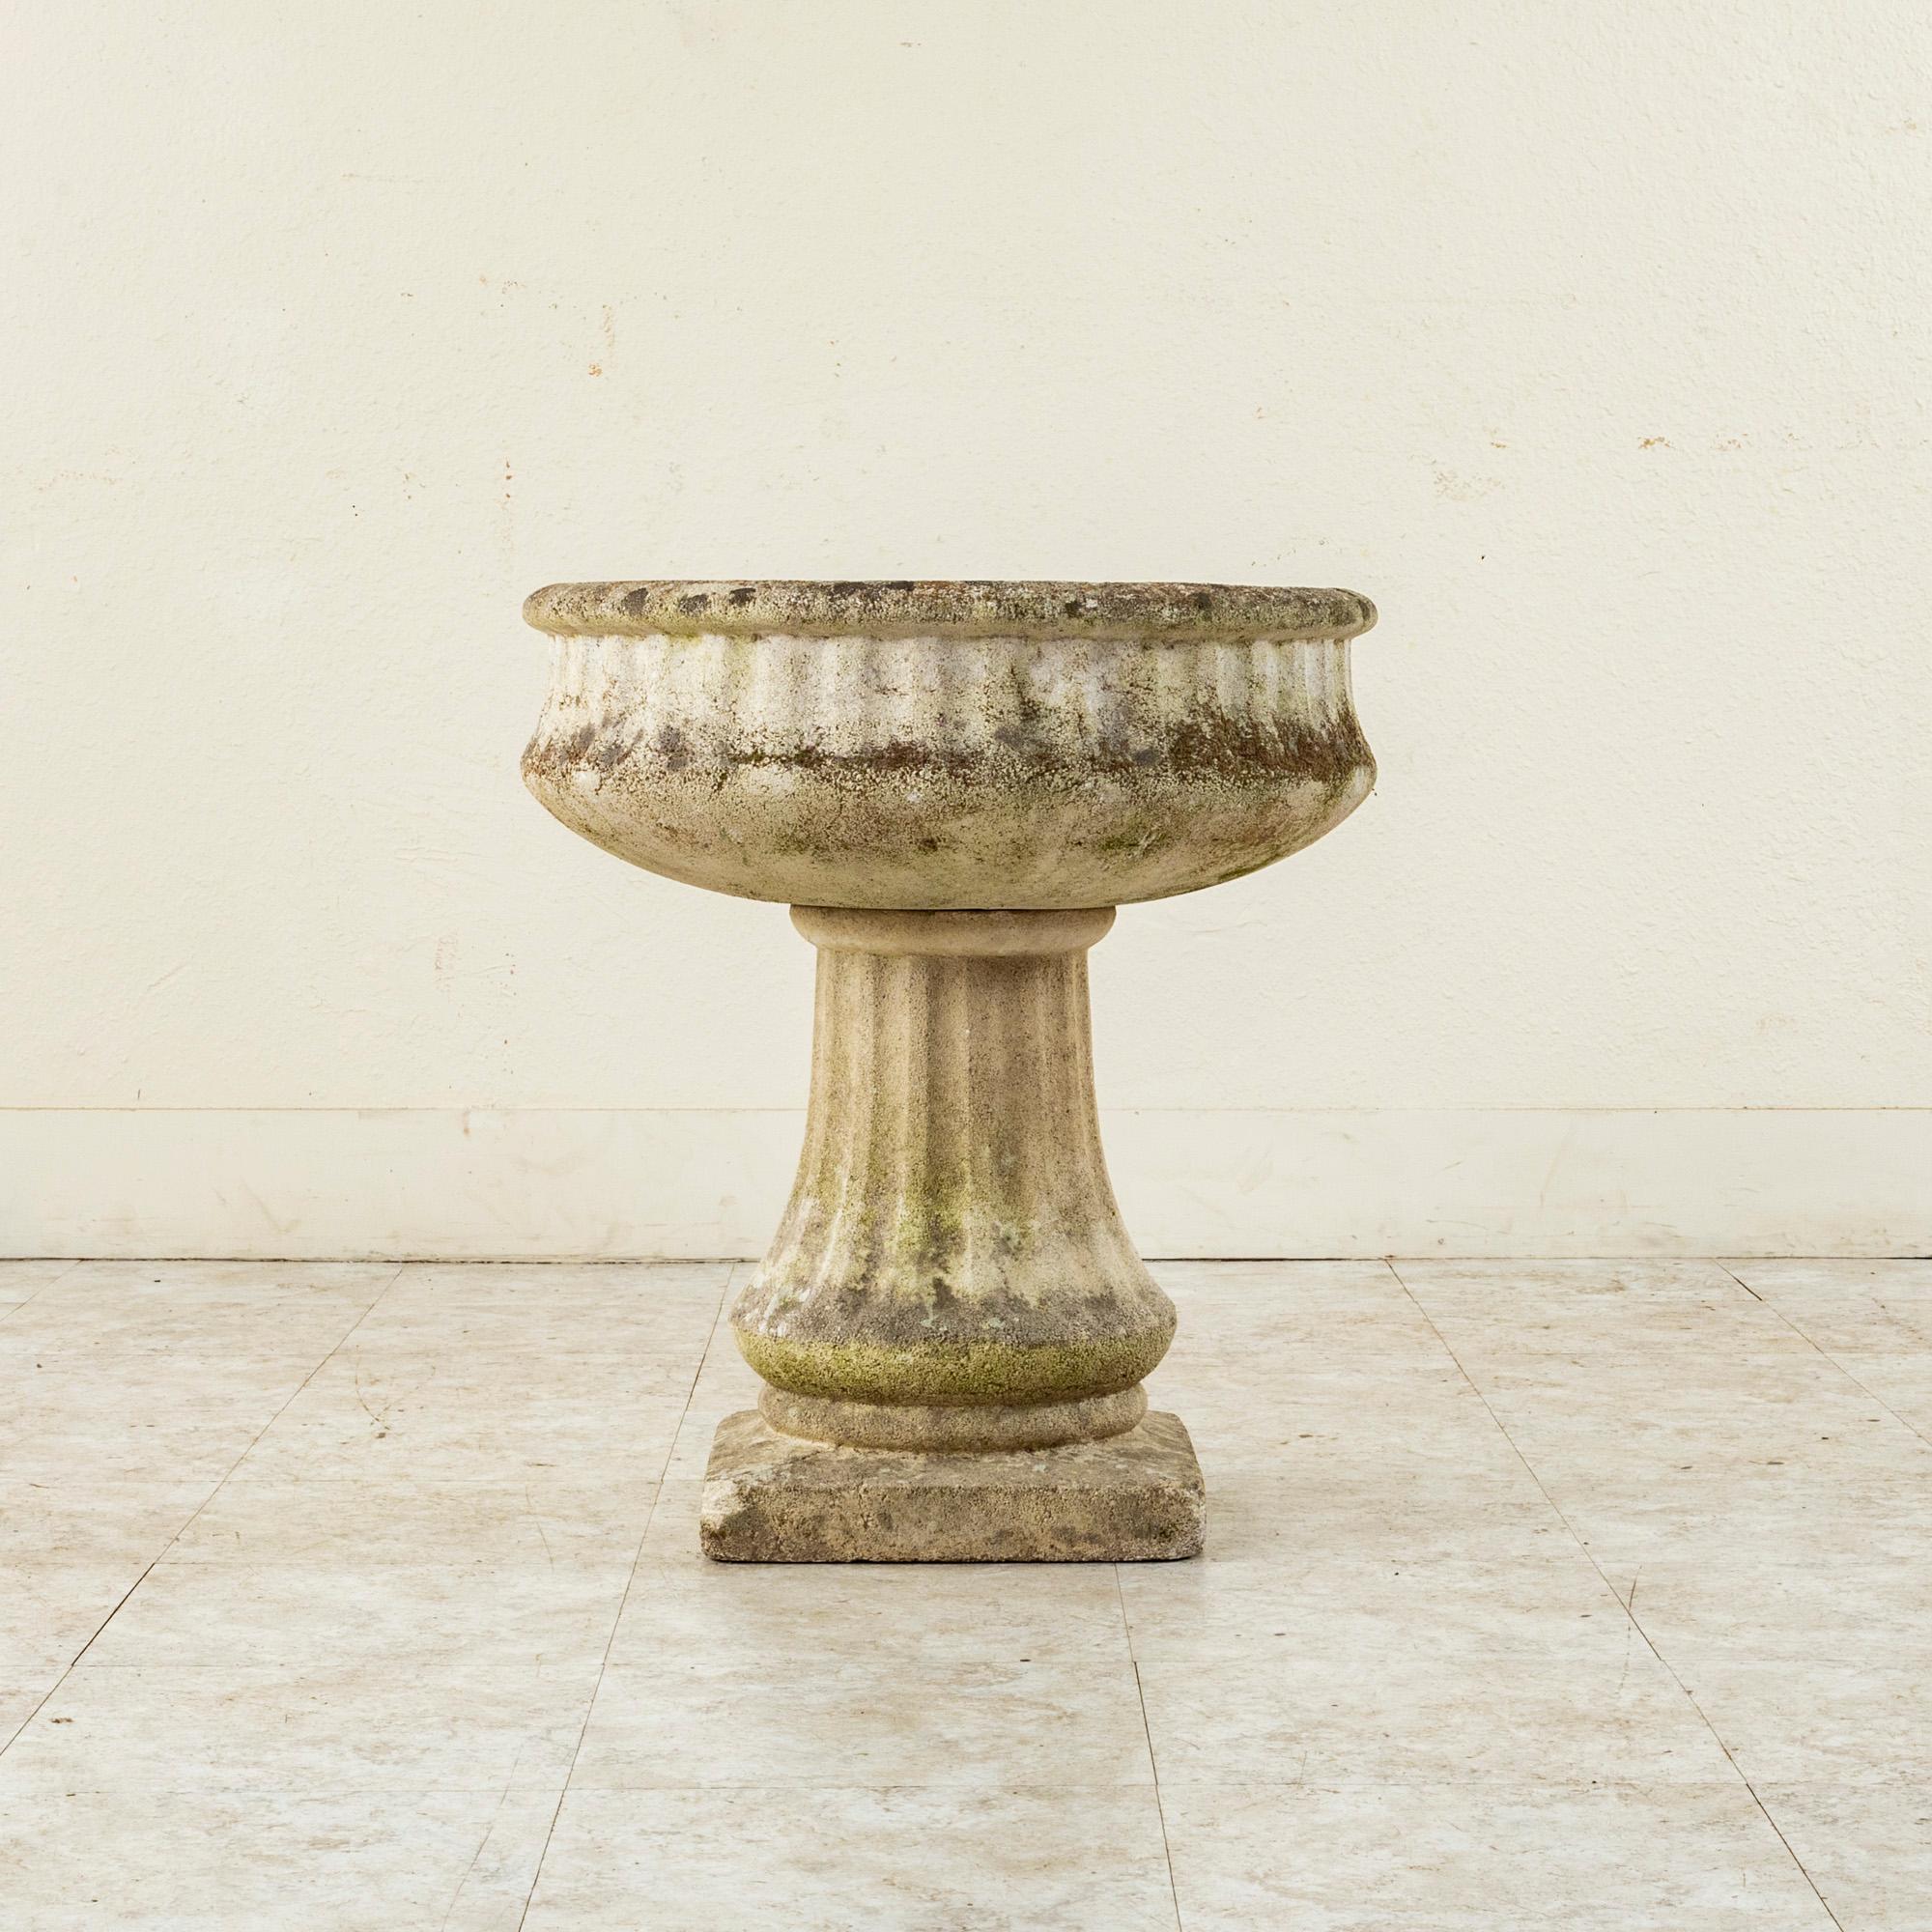 Cast Stone Mid-20th Century French Stone Urn on Pedestal